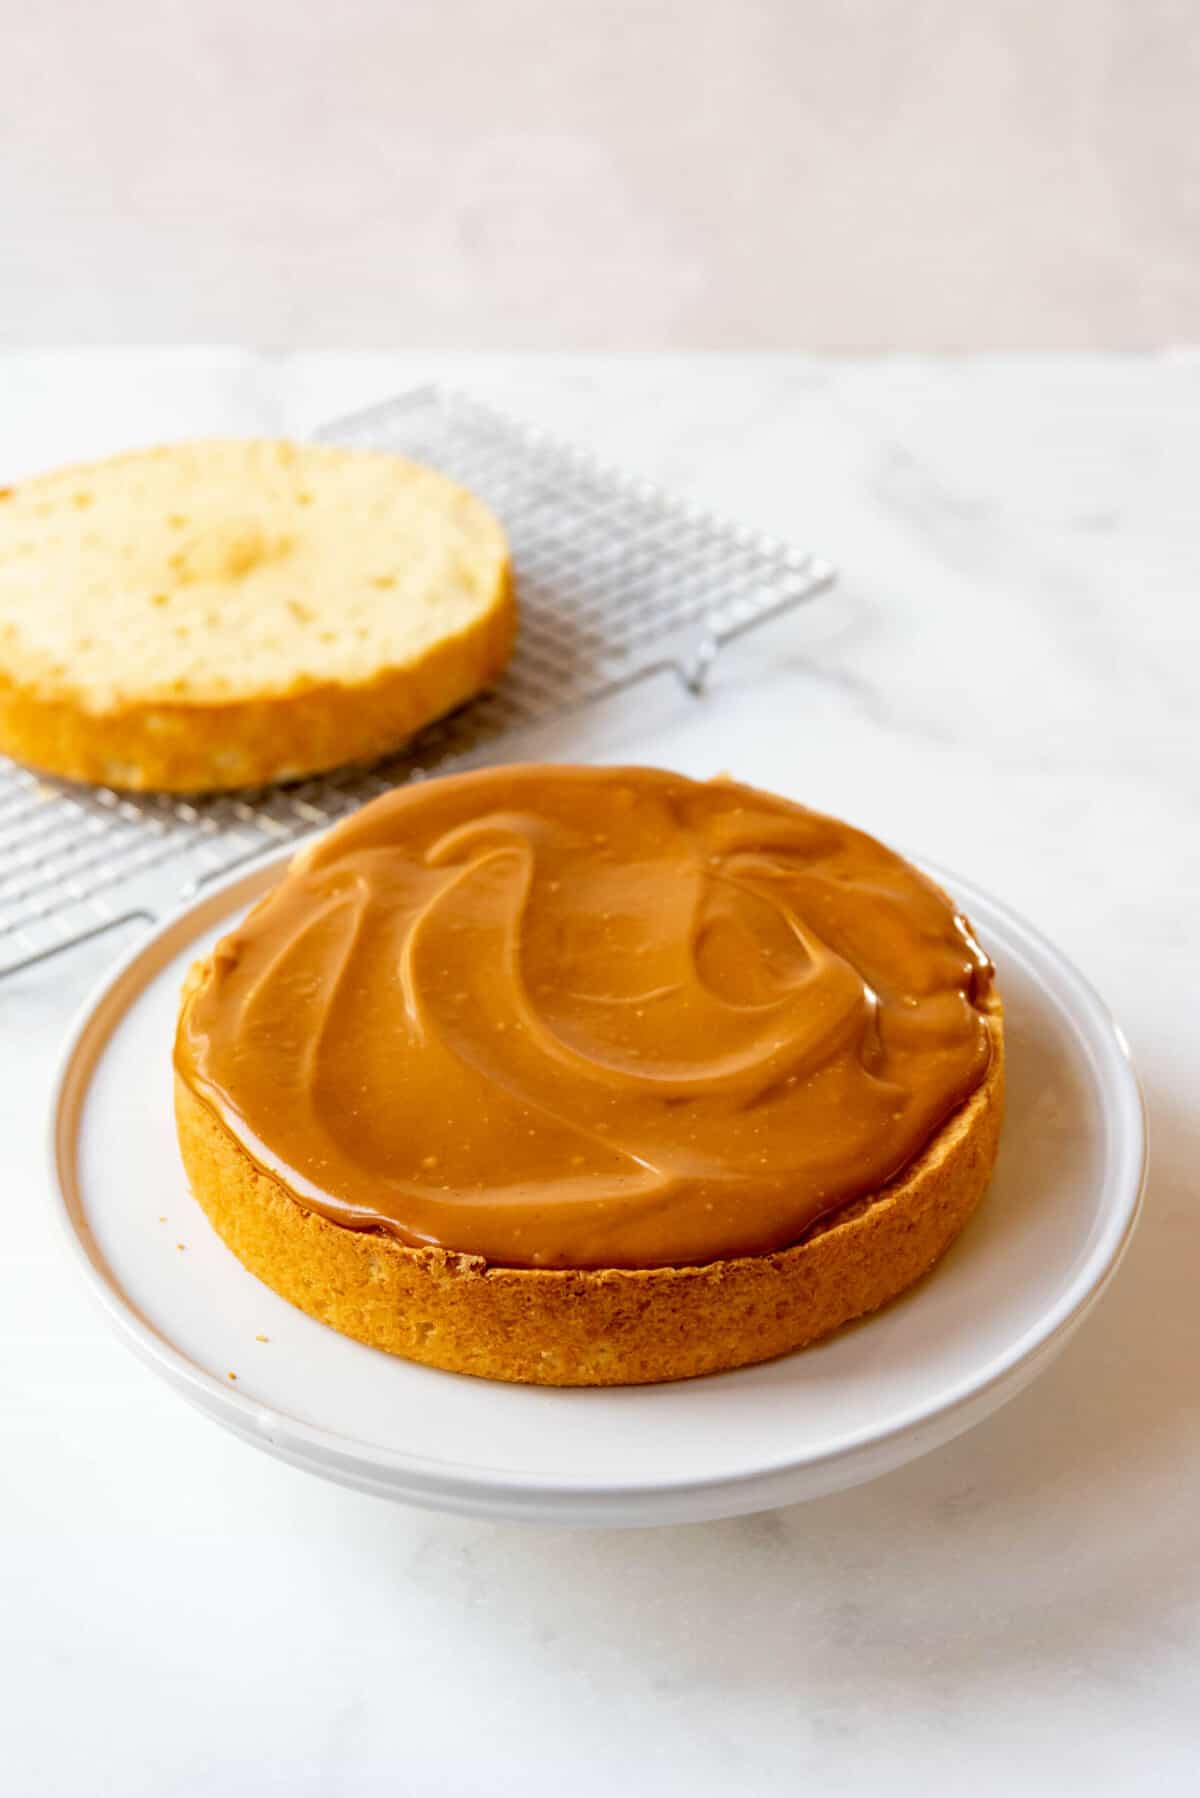 One layer of caramel cake with icing with the second layer on a cooling rack behind it.